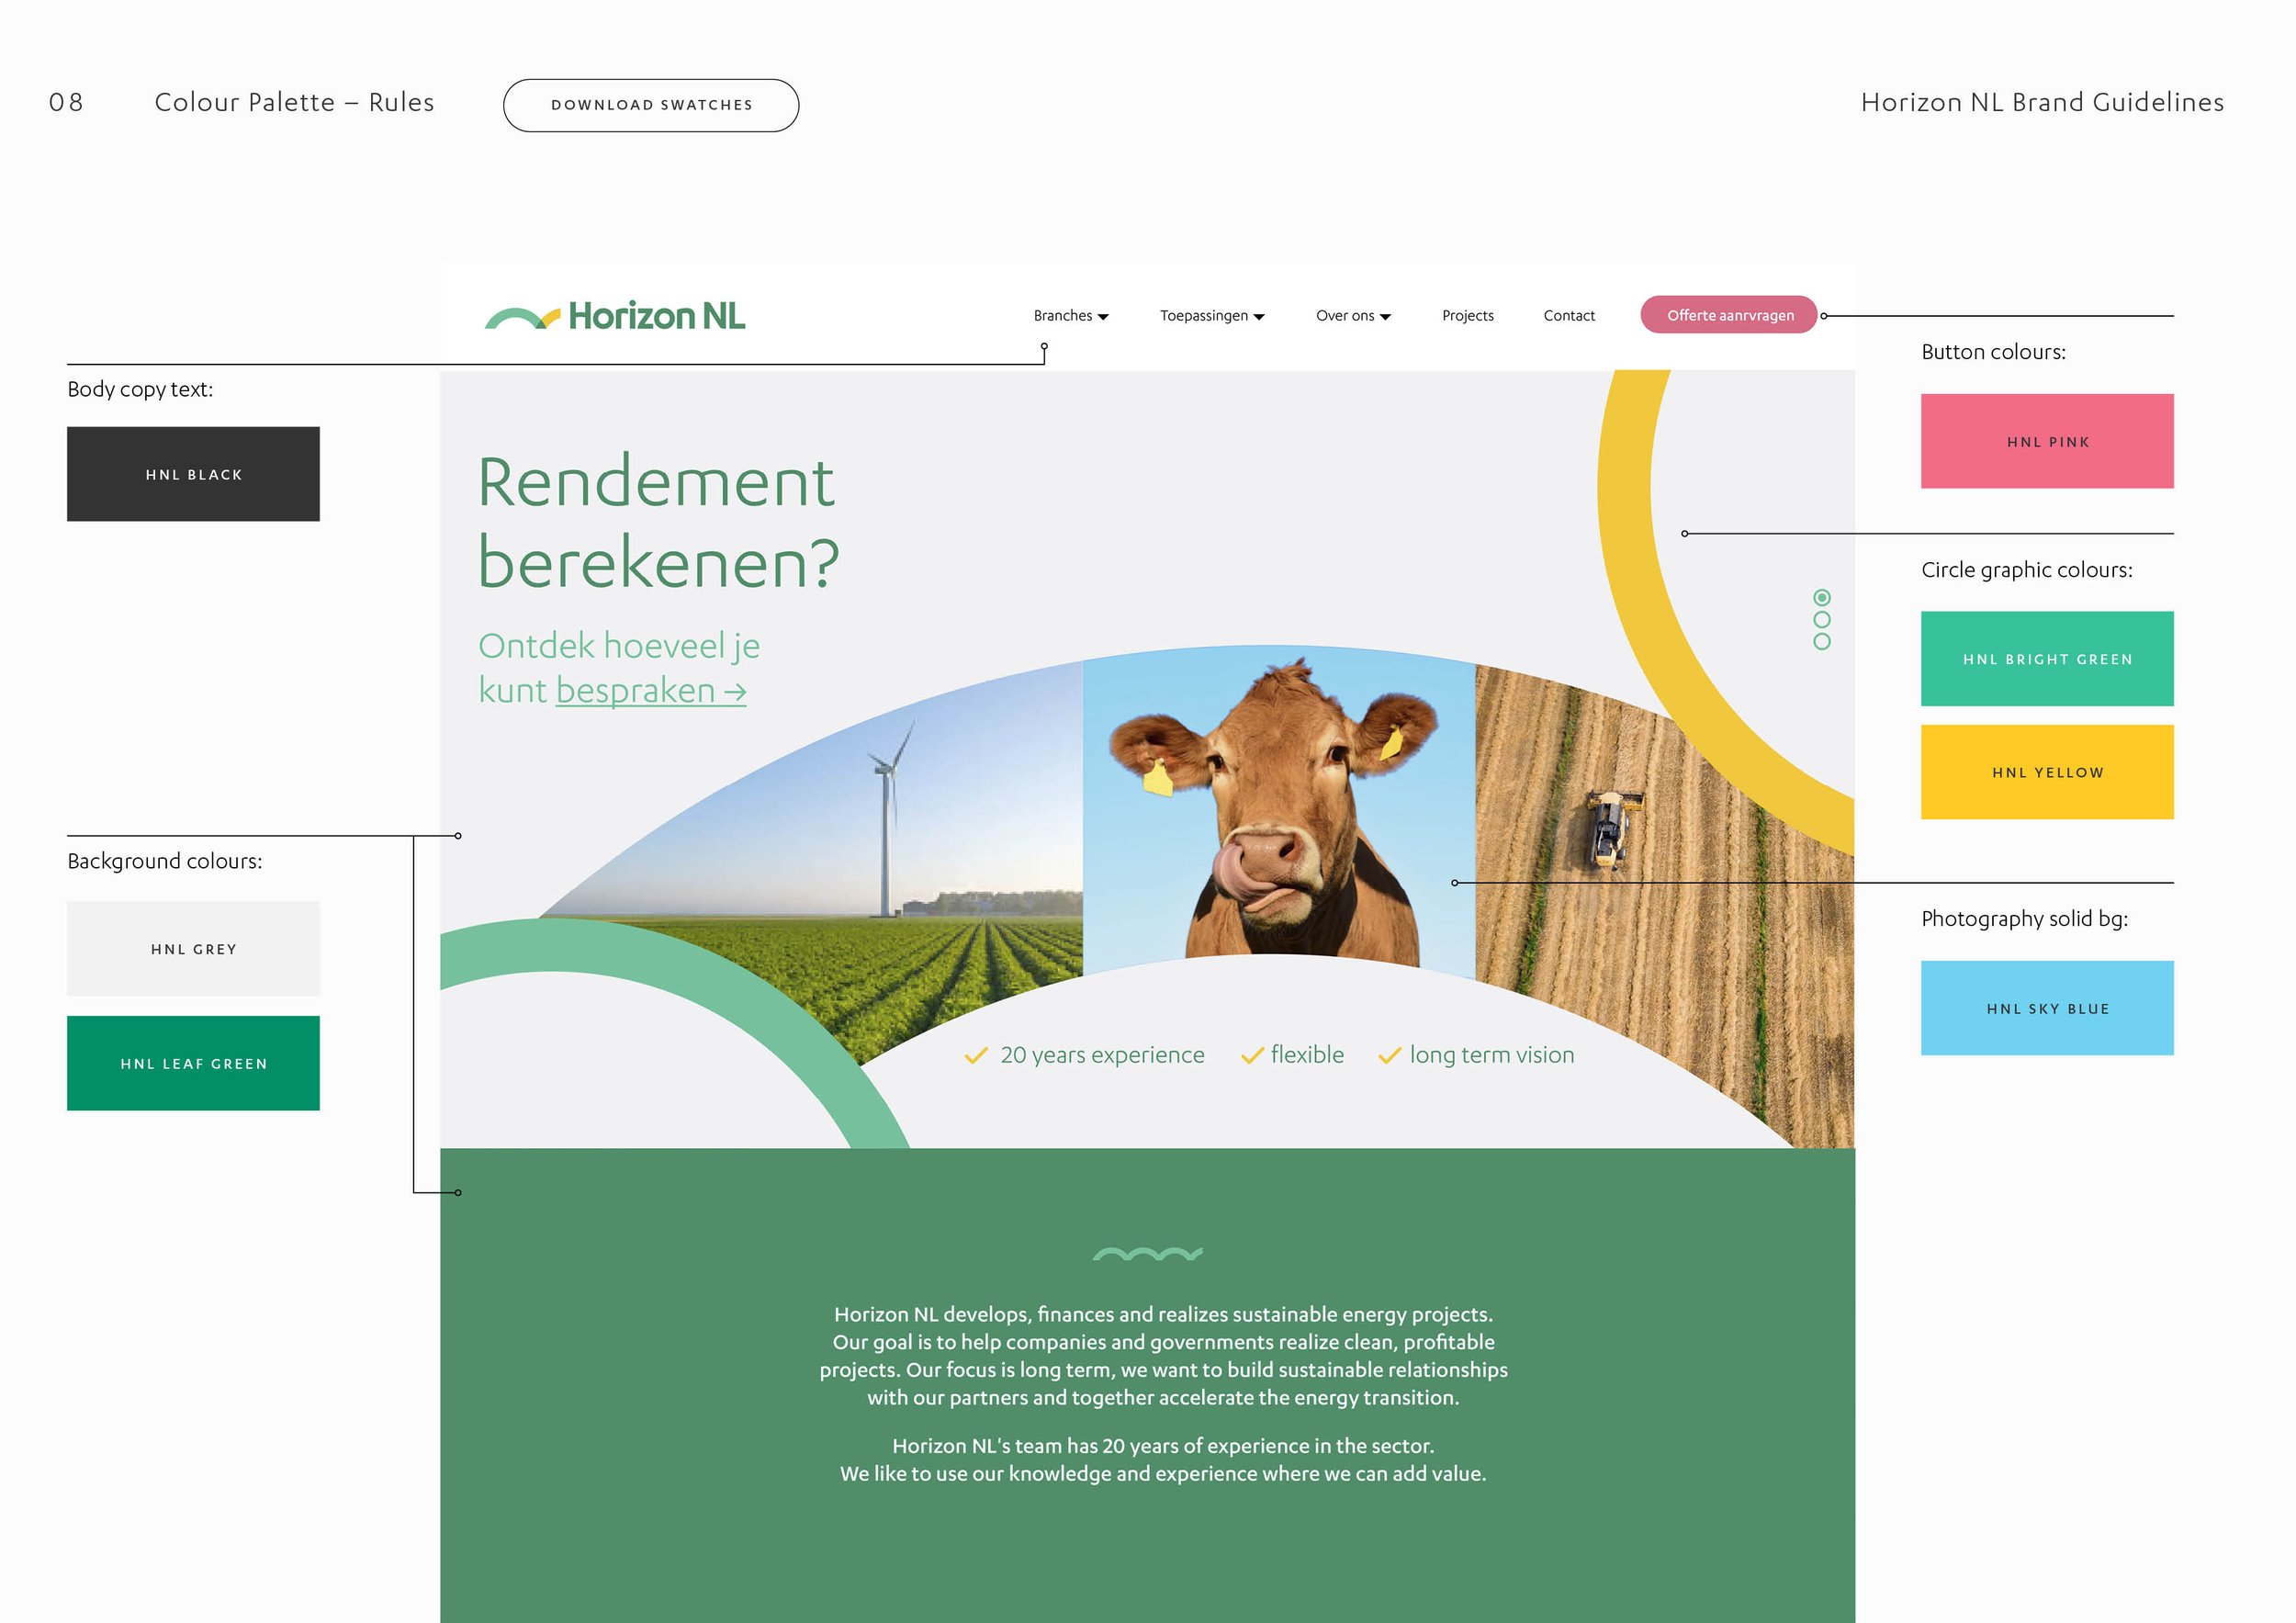 Horizon NL brand guidelines website page